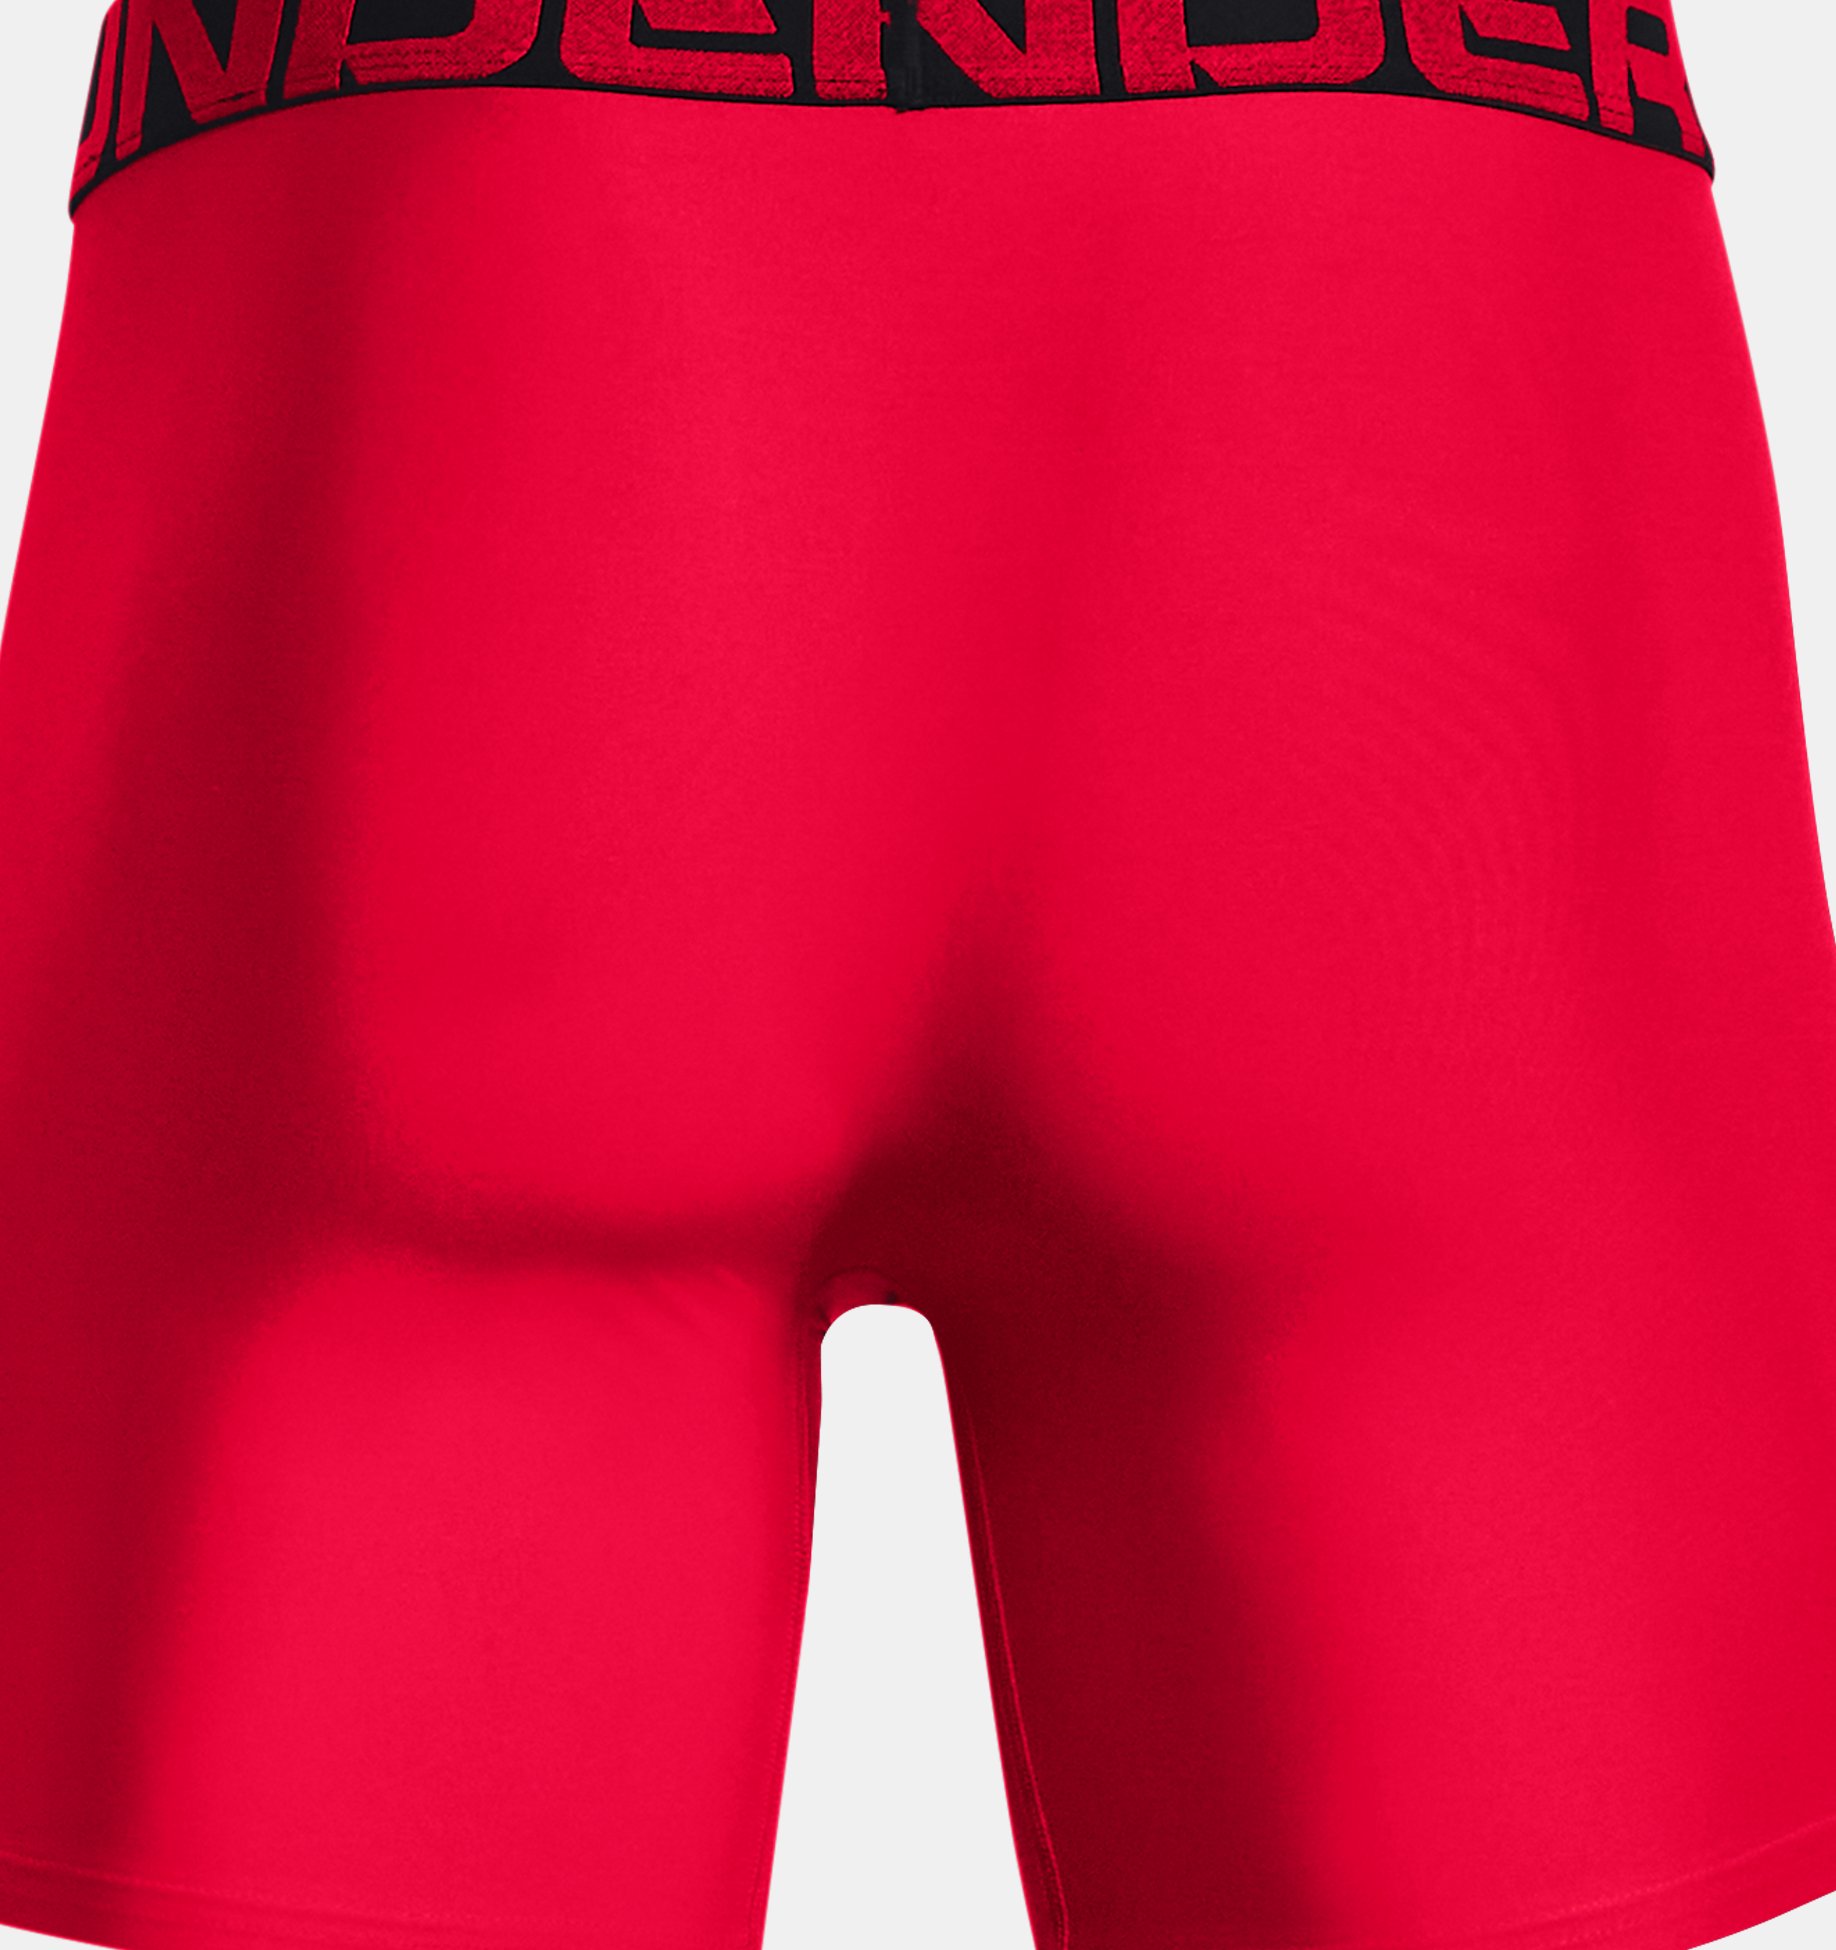 2-Pack Under Armour Tech Boxer Briefs Red Black Medium Large XL 1363619 6  Inch